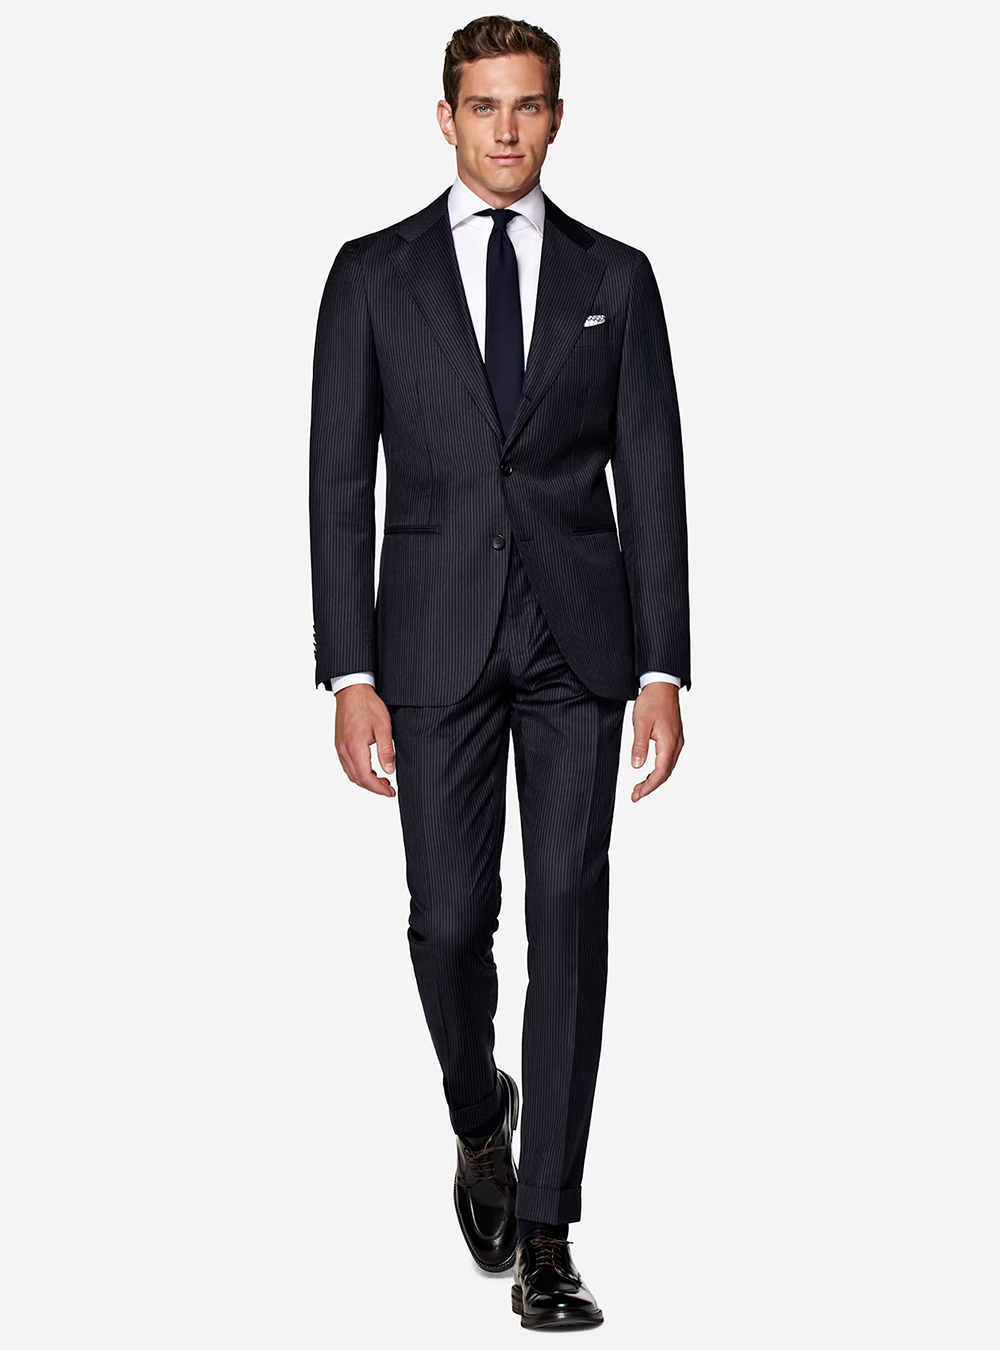 Navy pinstriped suit, white dress shirt, and black derby shoes